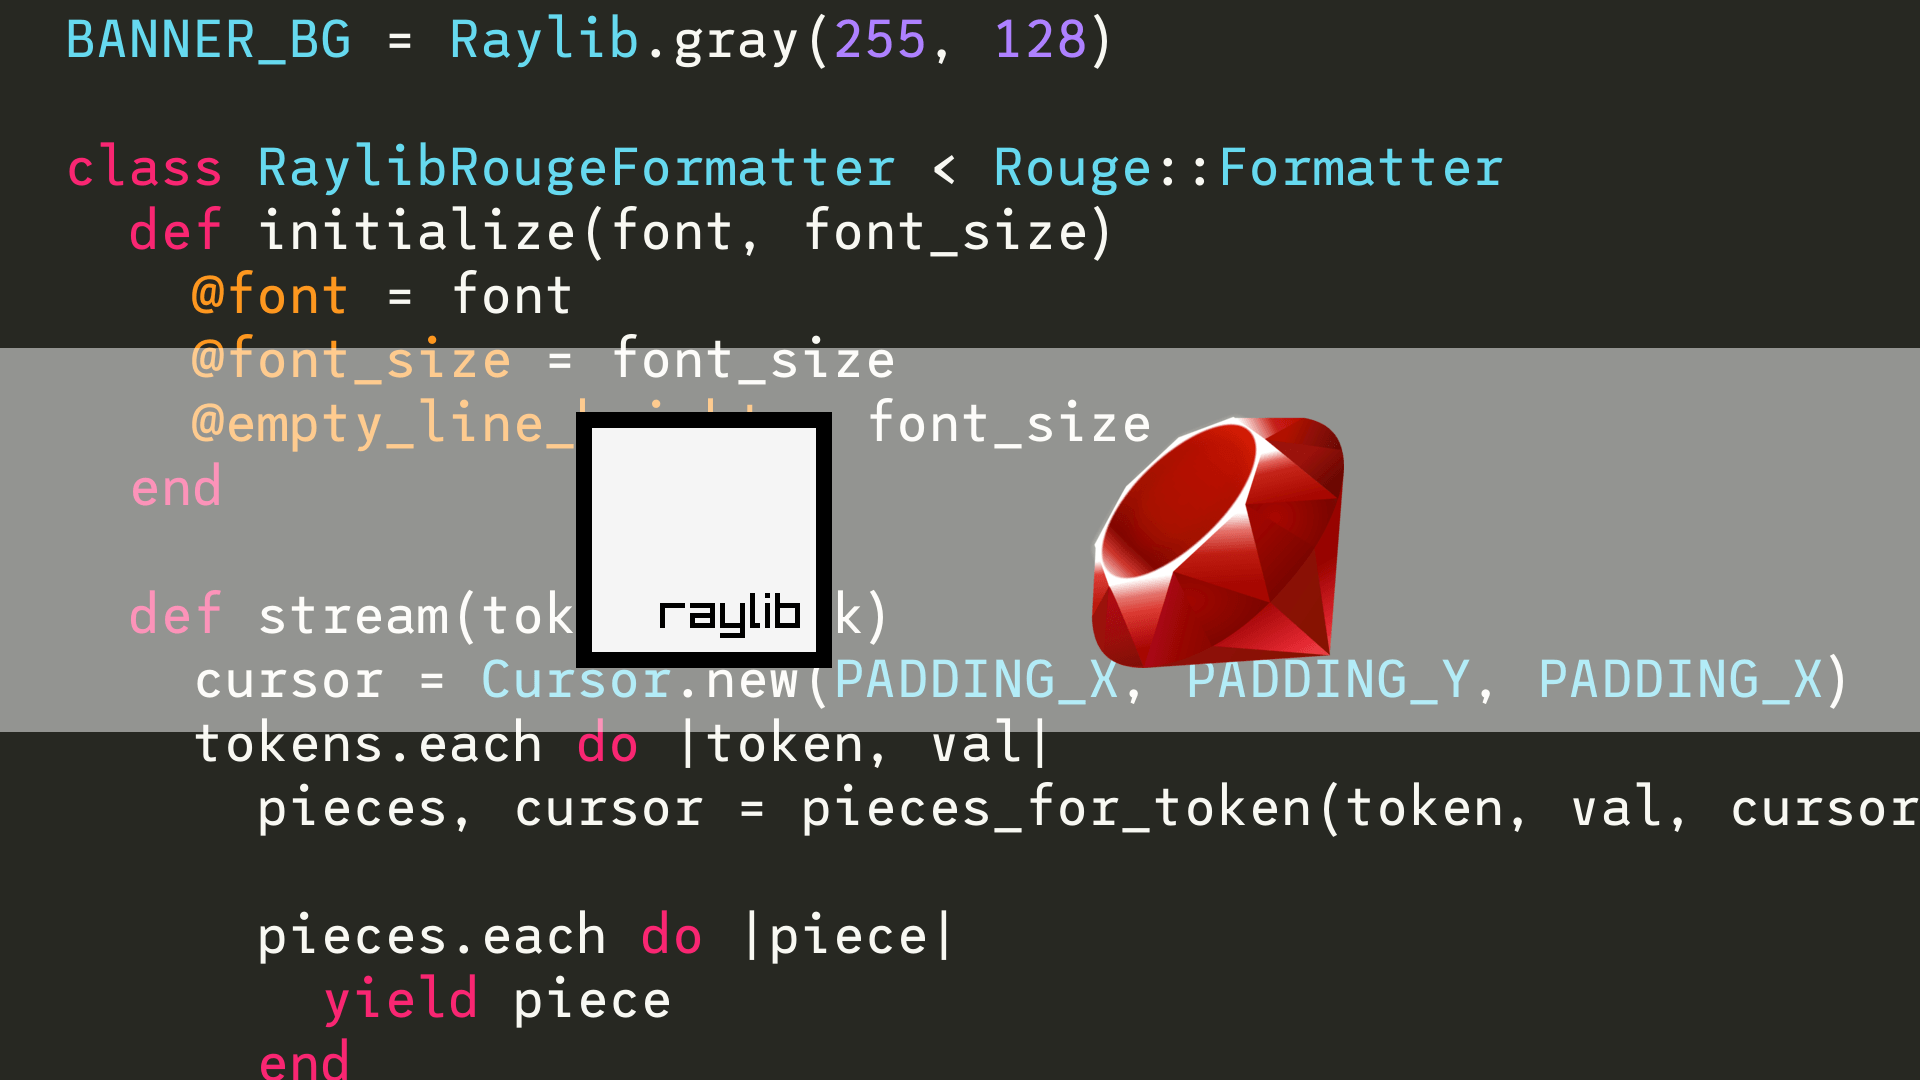 An application that shows the Raylib logo, the Ruby logo and the source code for itself